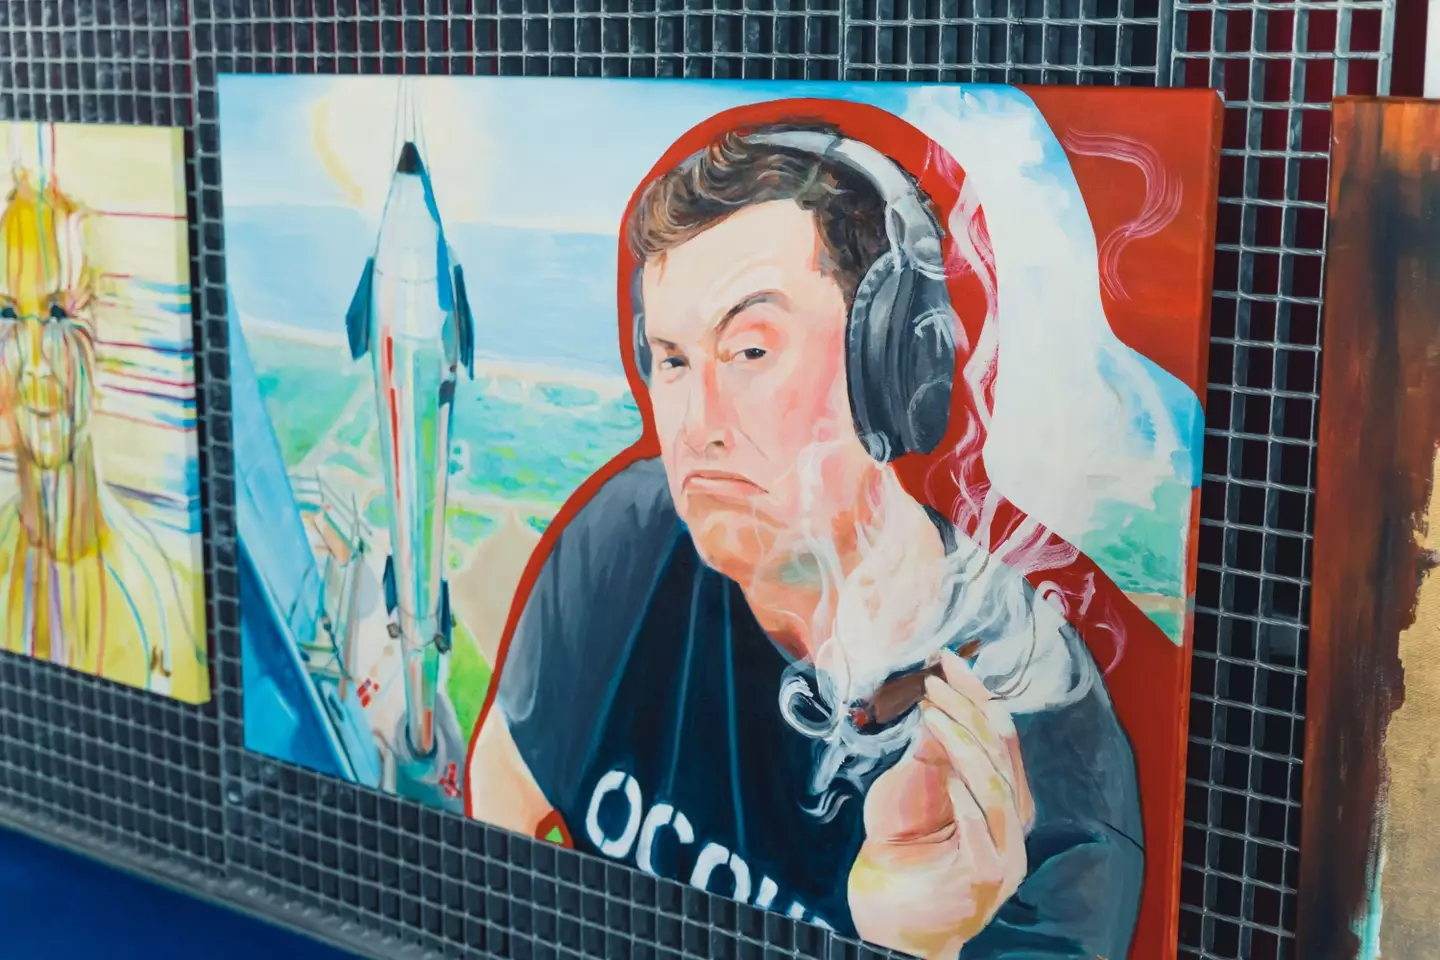 People have used the viral clip of Musk smoking weed for artistic inspiration.